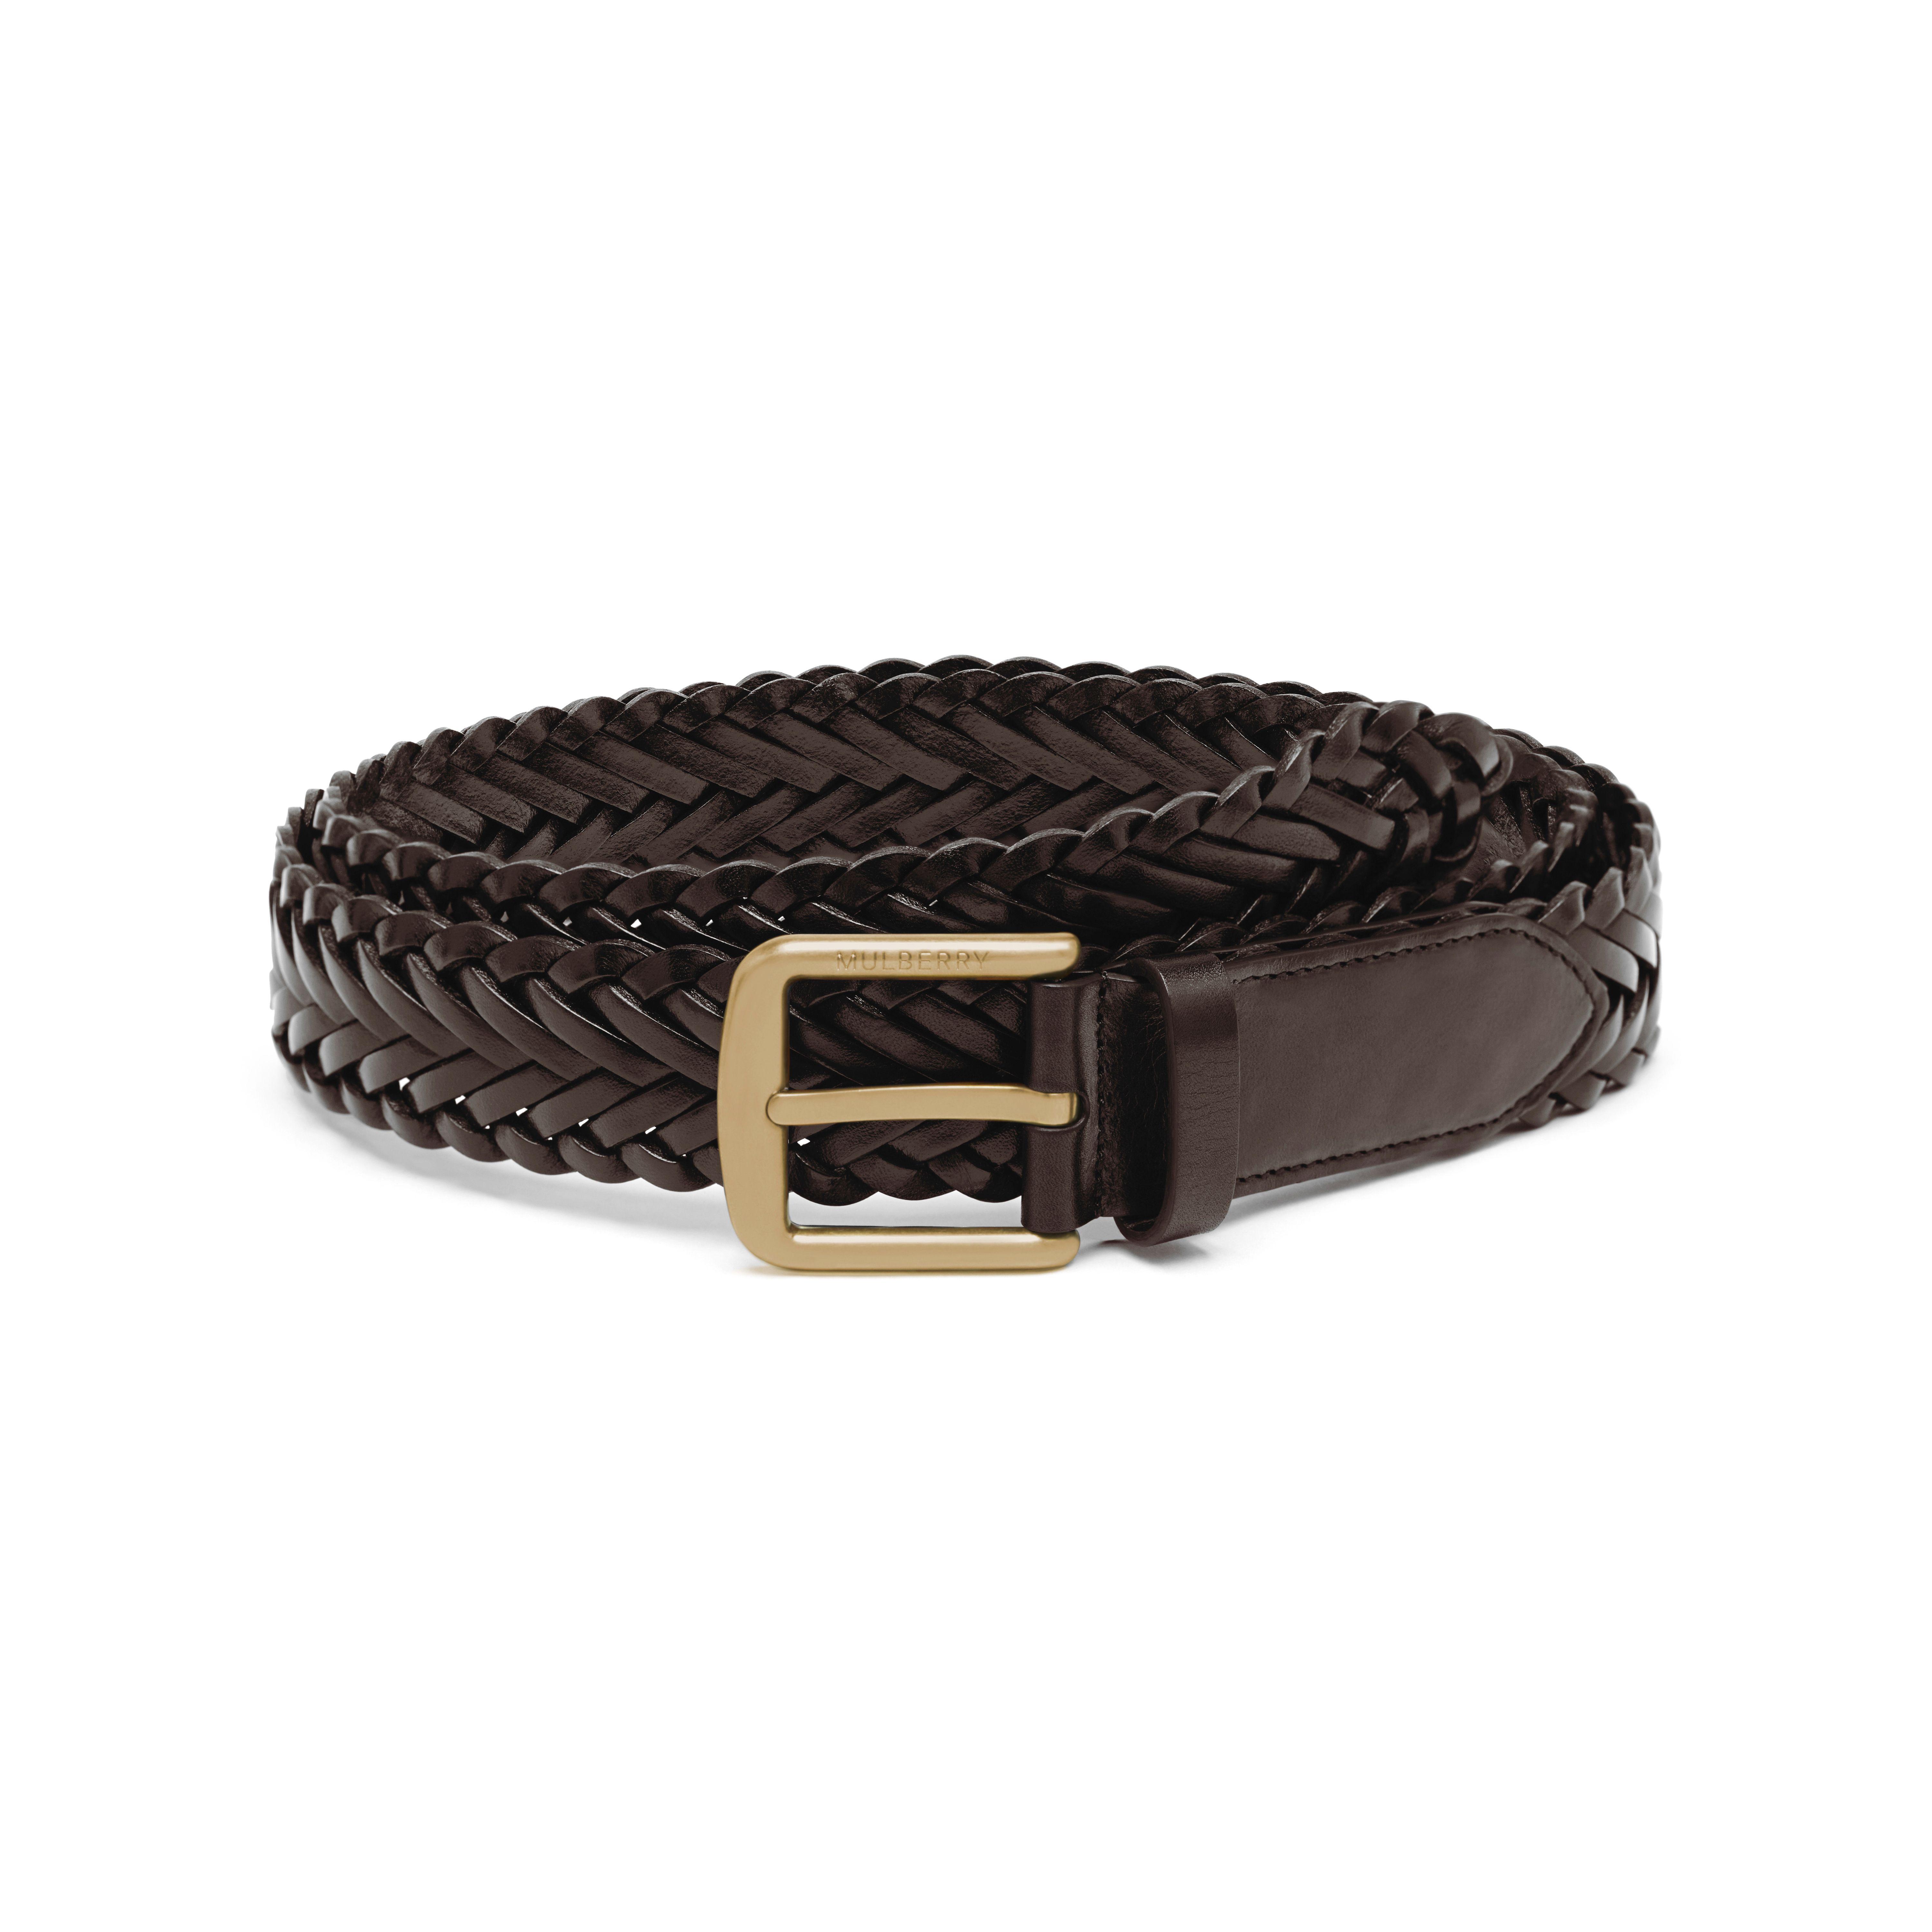 Mulberry Double Plait Braided Belt in Brown for Men - Lyst